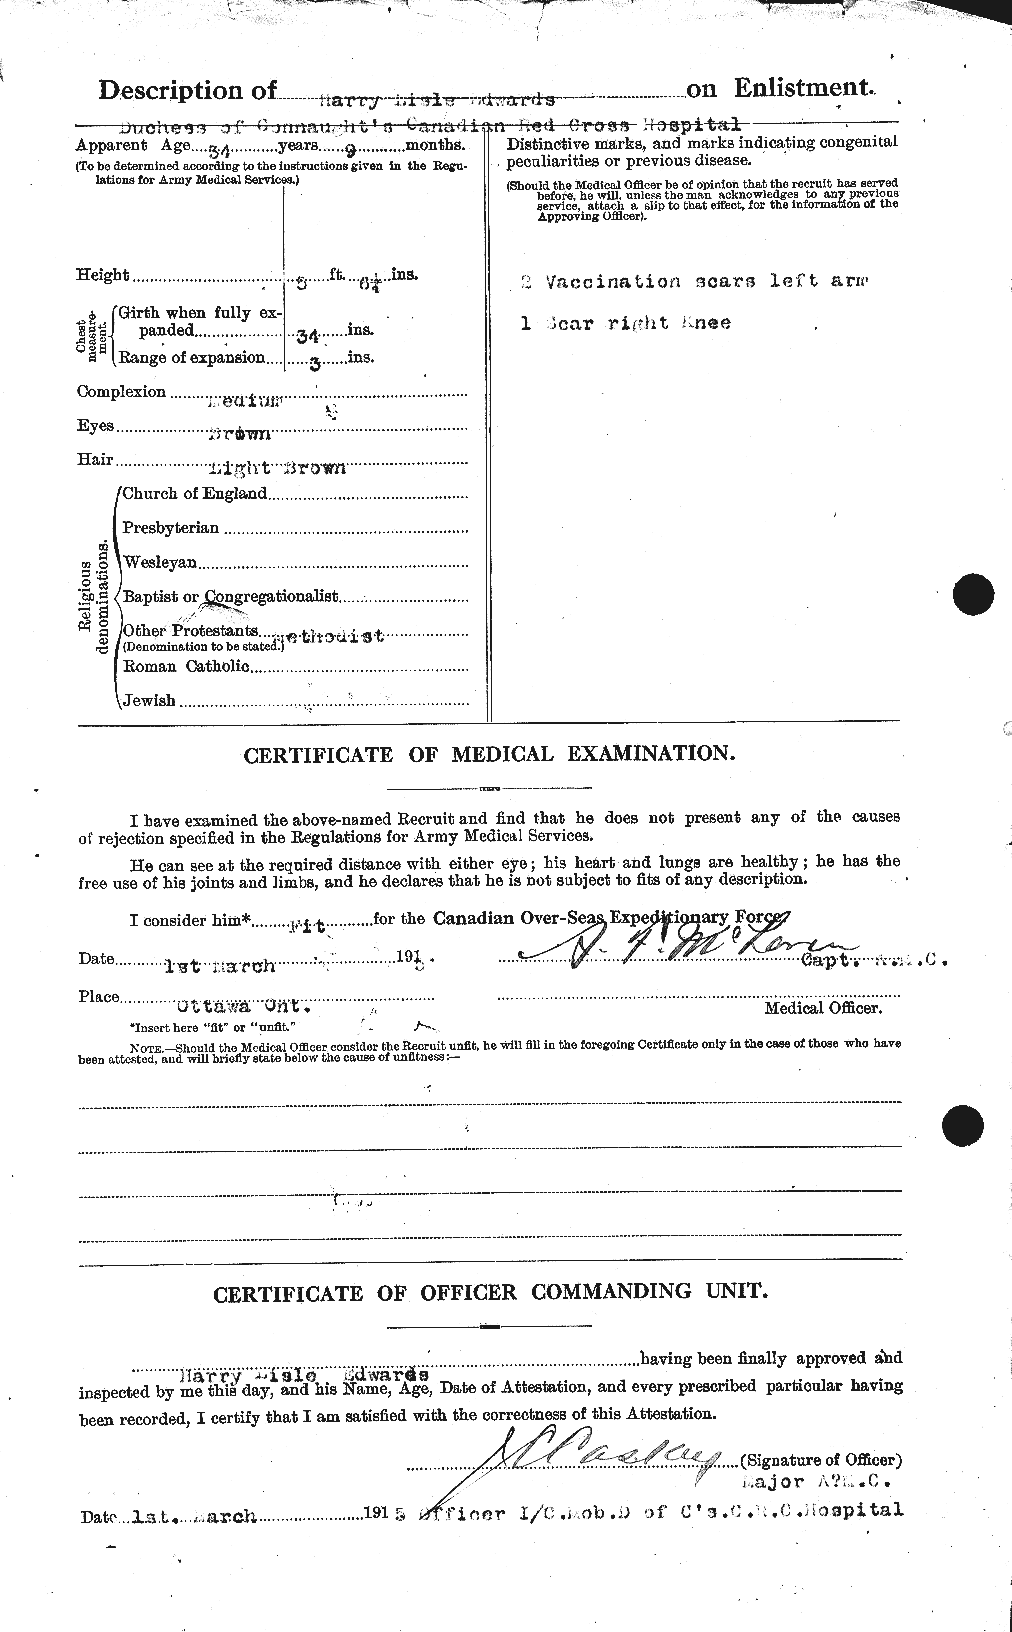 Personnel Records of the First World War - CEF 309744b